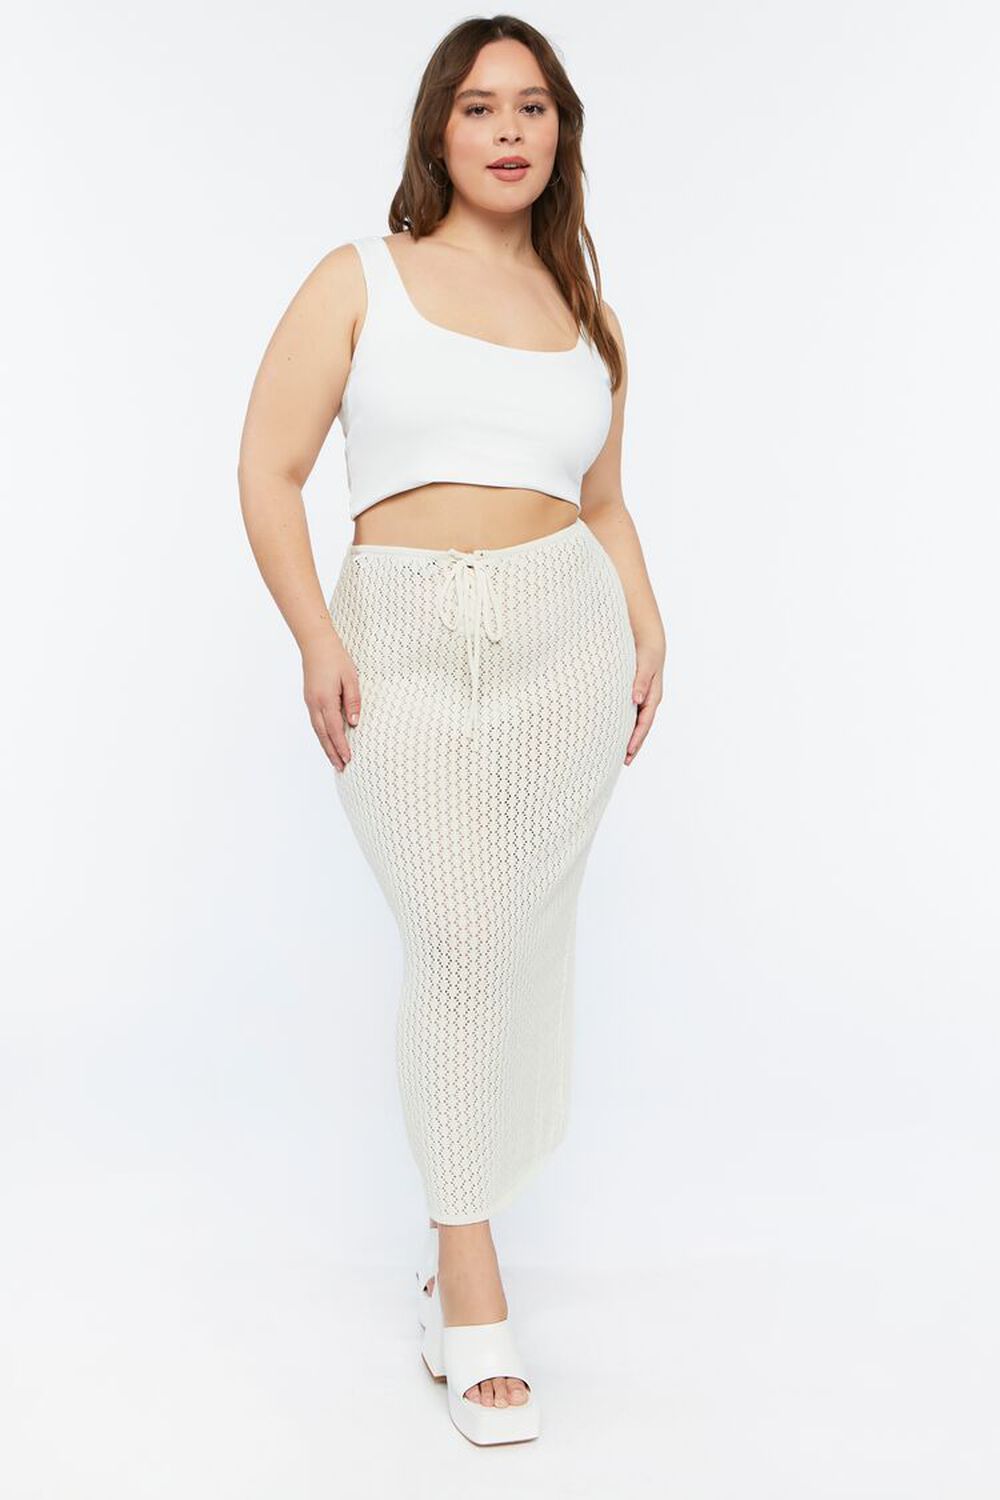 high waist skirt and crop top for plus size